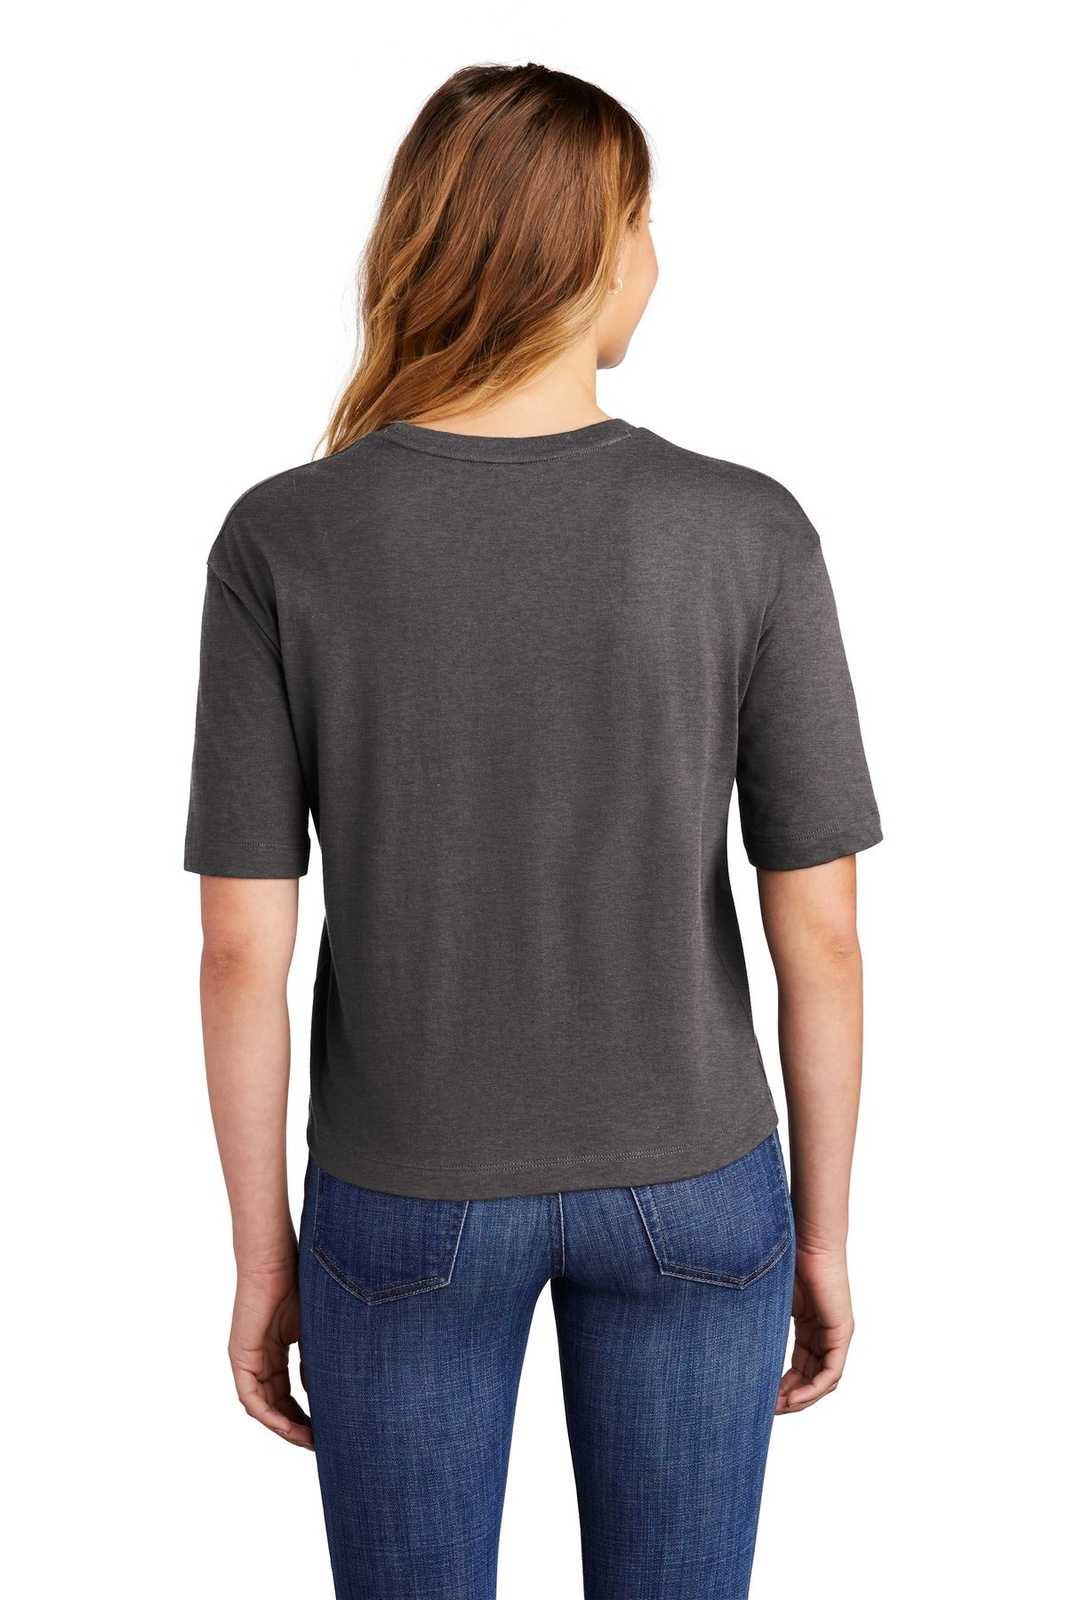 District DT6402 Women's V.I.T. Boxy Tee - Heathered Charcoal - HIT a Double - 1